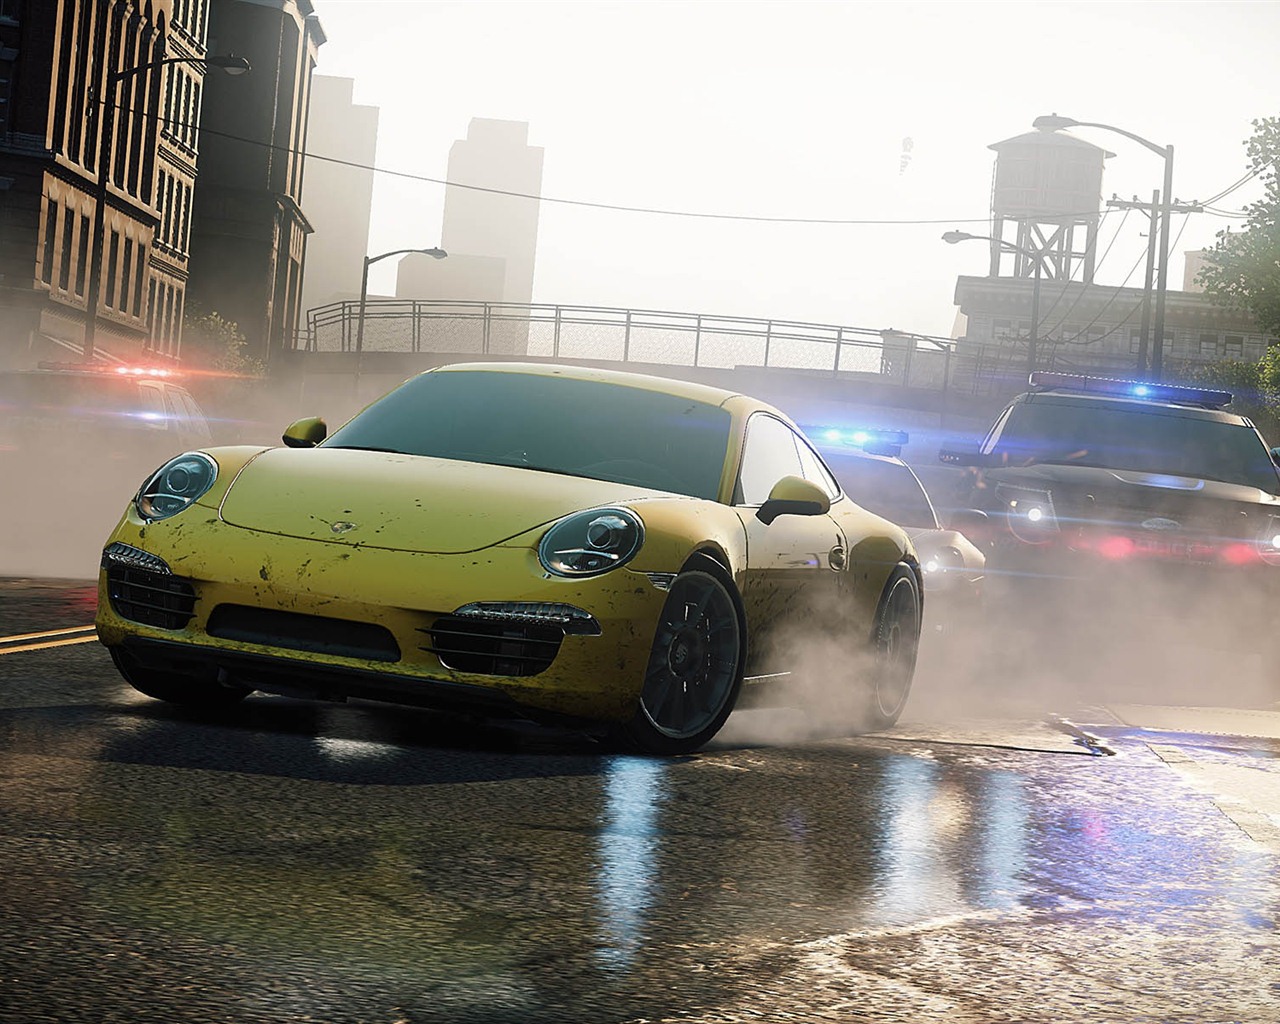 Need for Speed: Most Wanted 极品飞车17：最高通缉 高清壁纸18 - 1280x1024